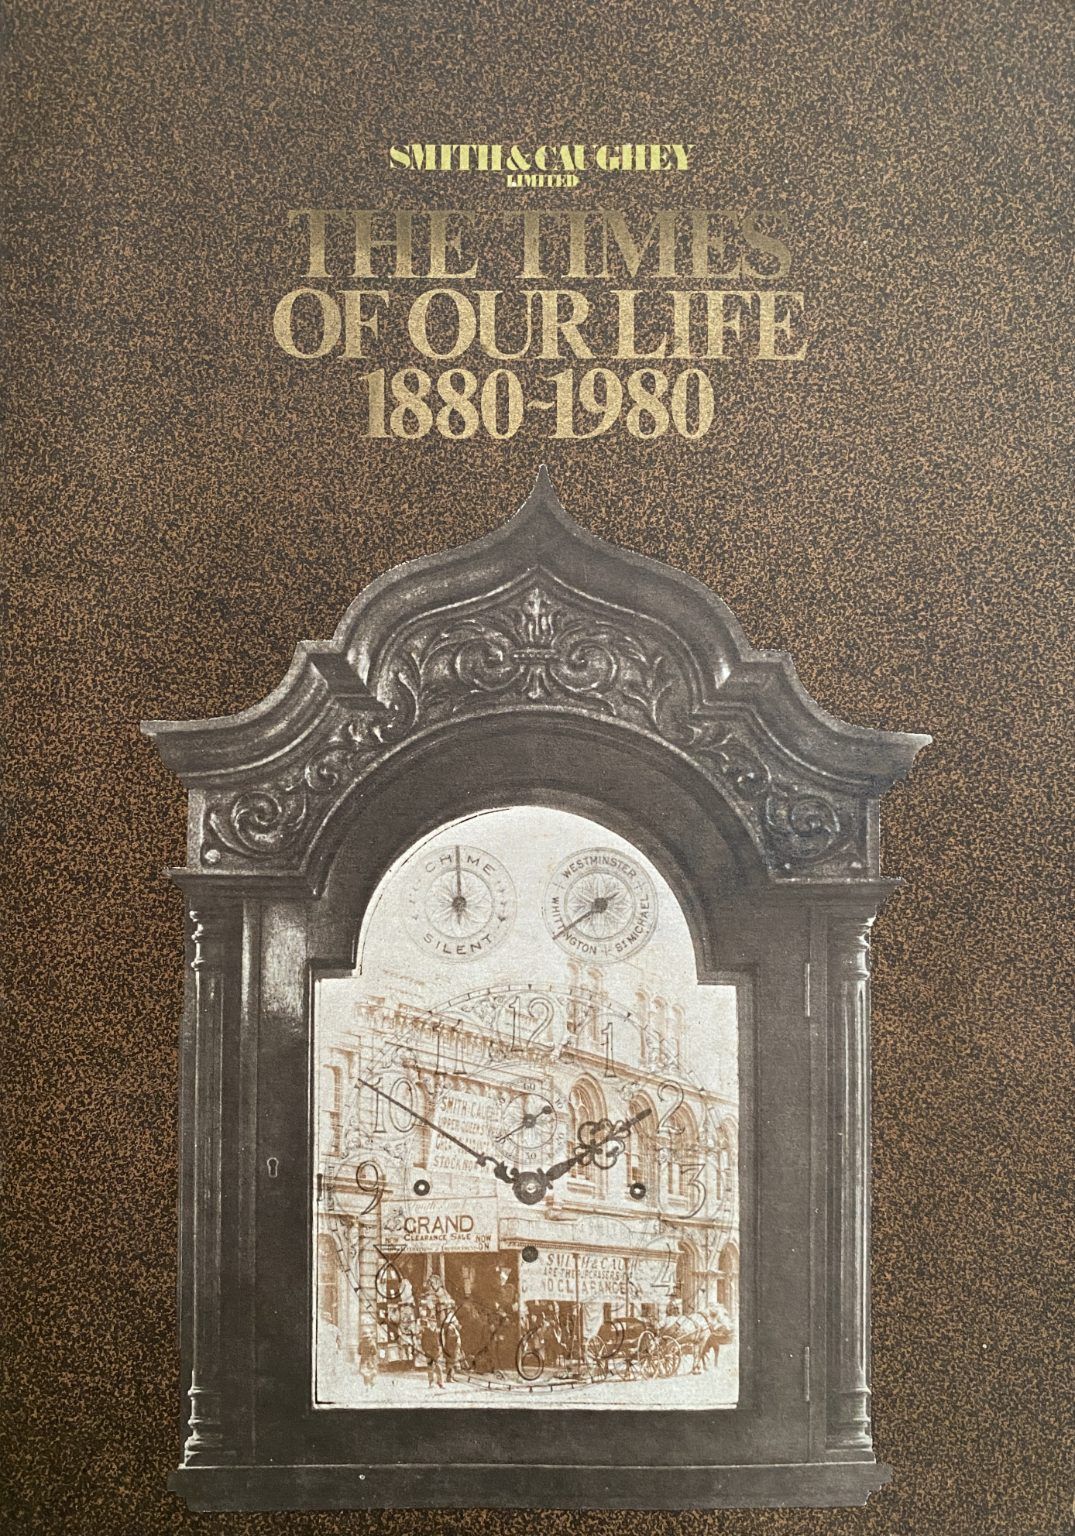 SMITH & CAUGHEY: The Times of our Life 1880-1980